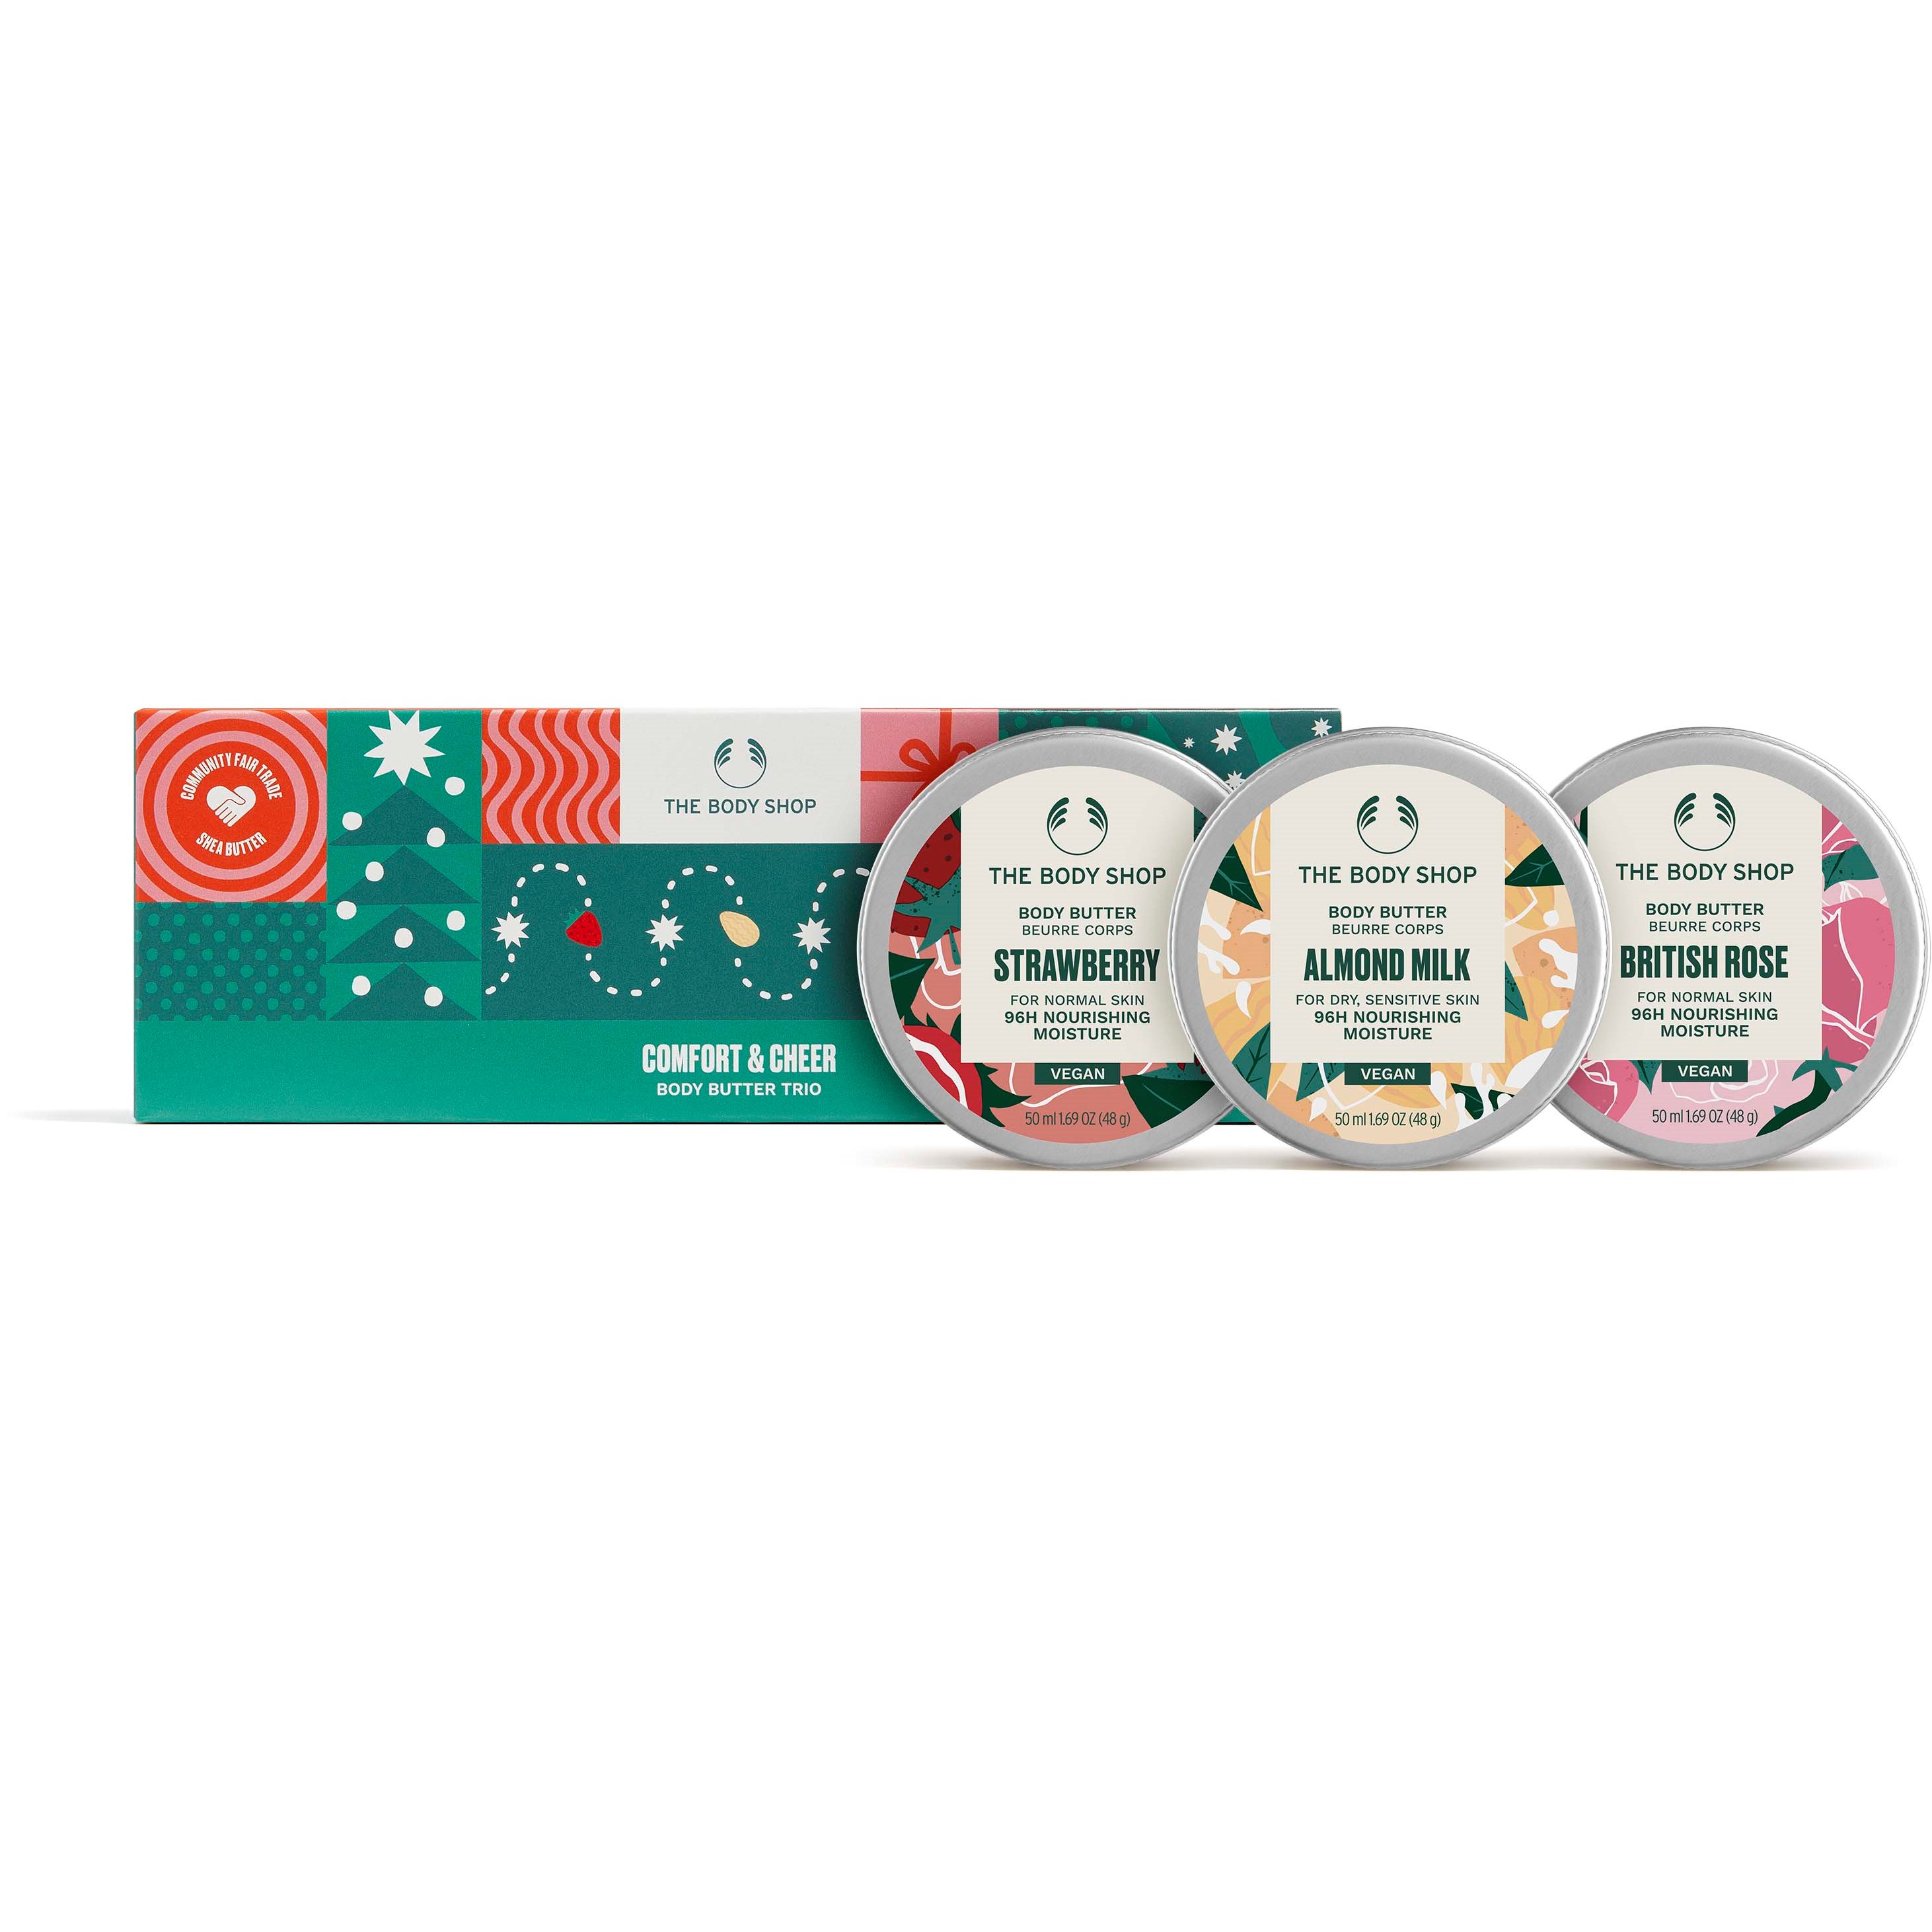 The Body Shop Comfort & Cheer Body Butter Trio